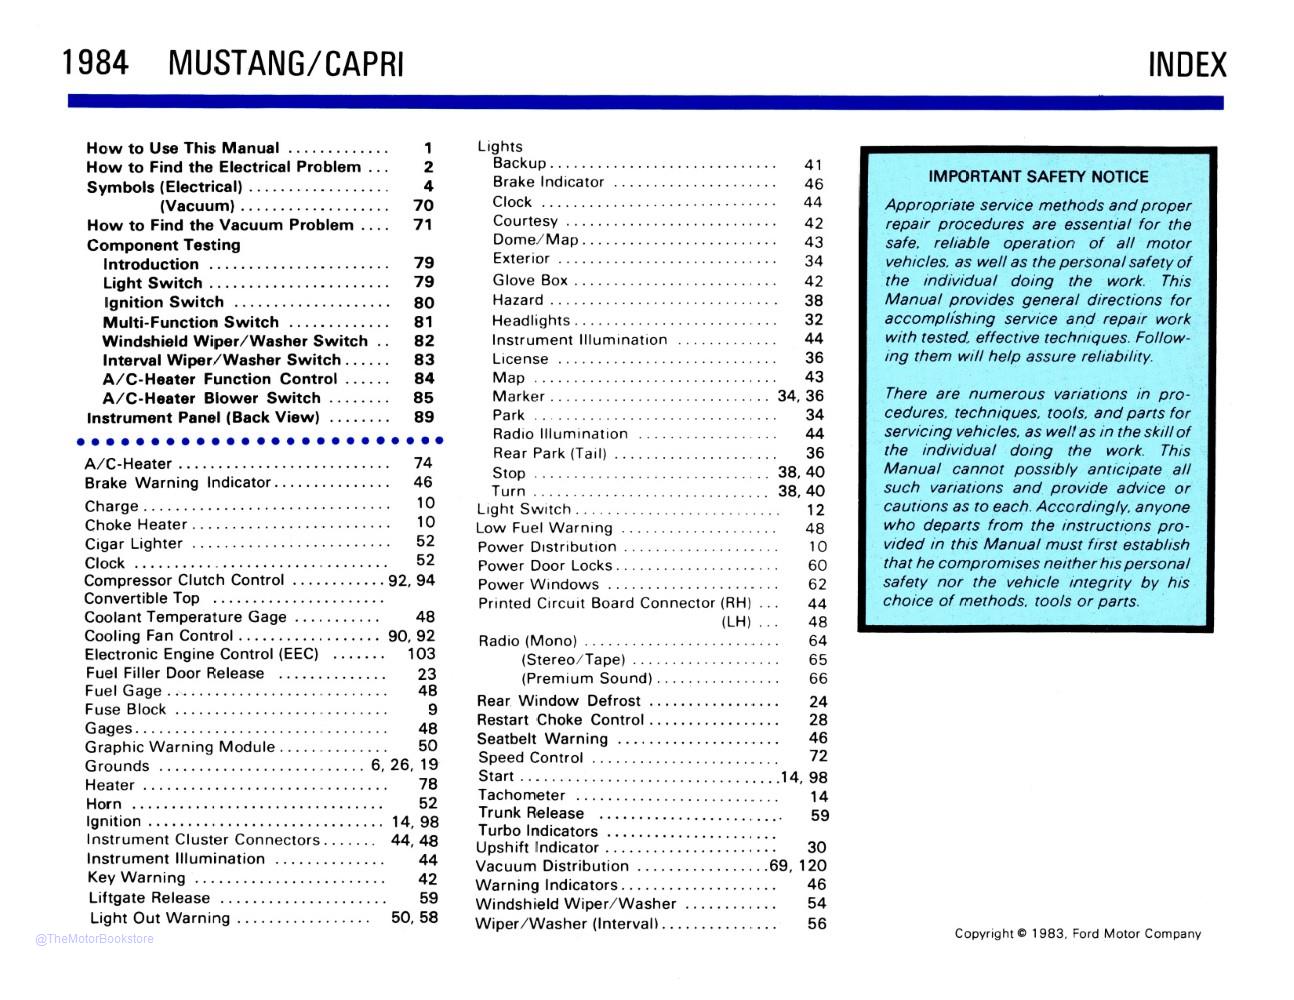 1984 Ford Mustang Capri Electrical Vacuum Troubleshooting Manual  - Table of Contents